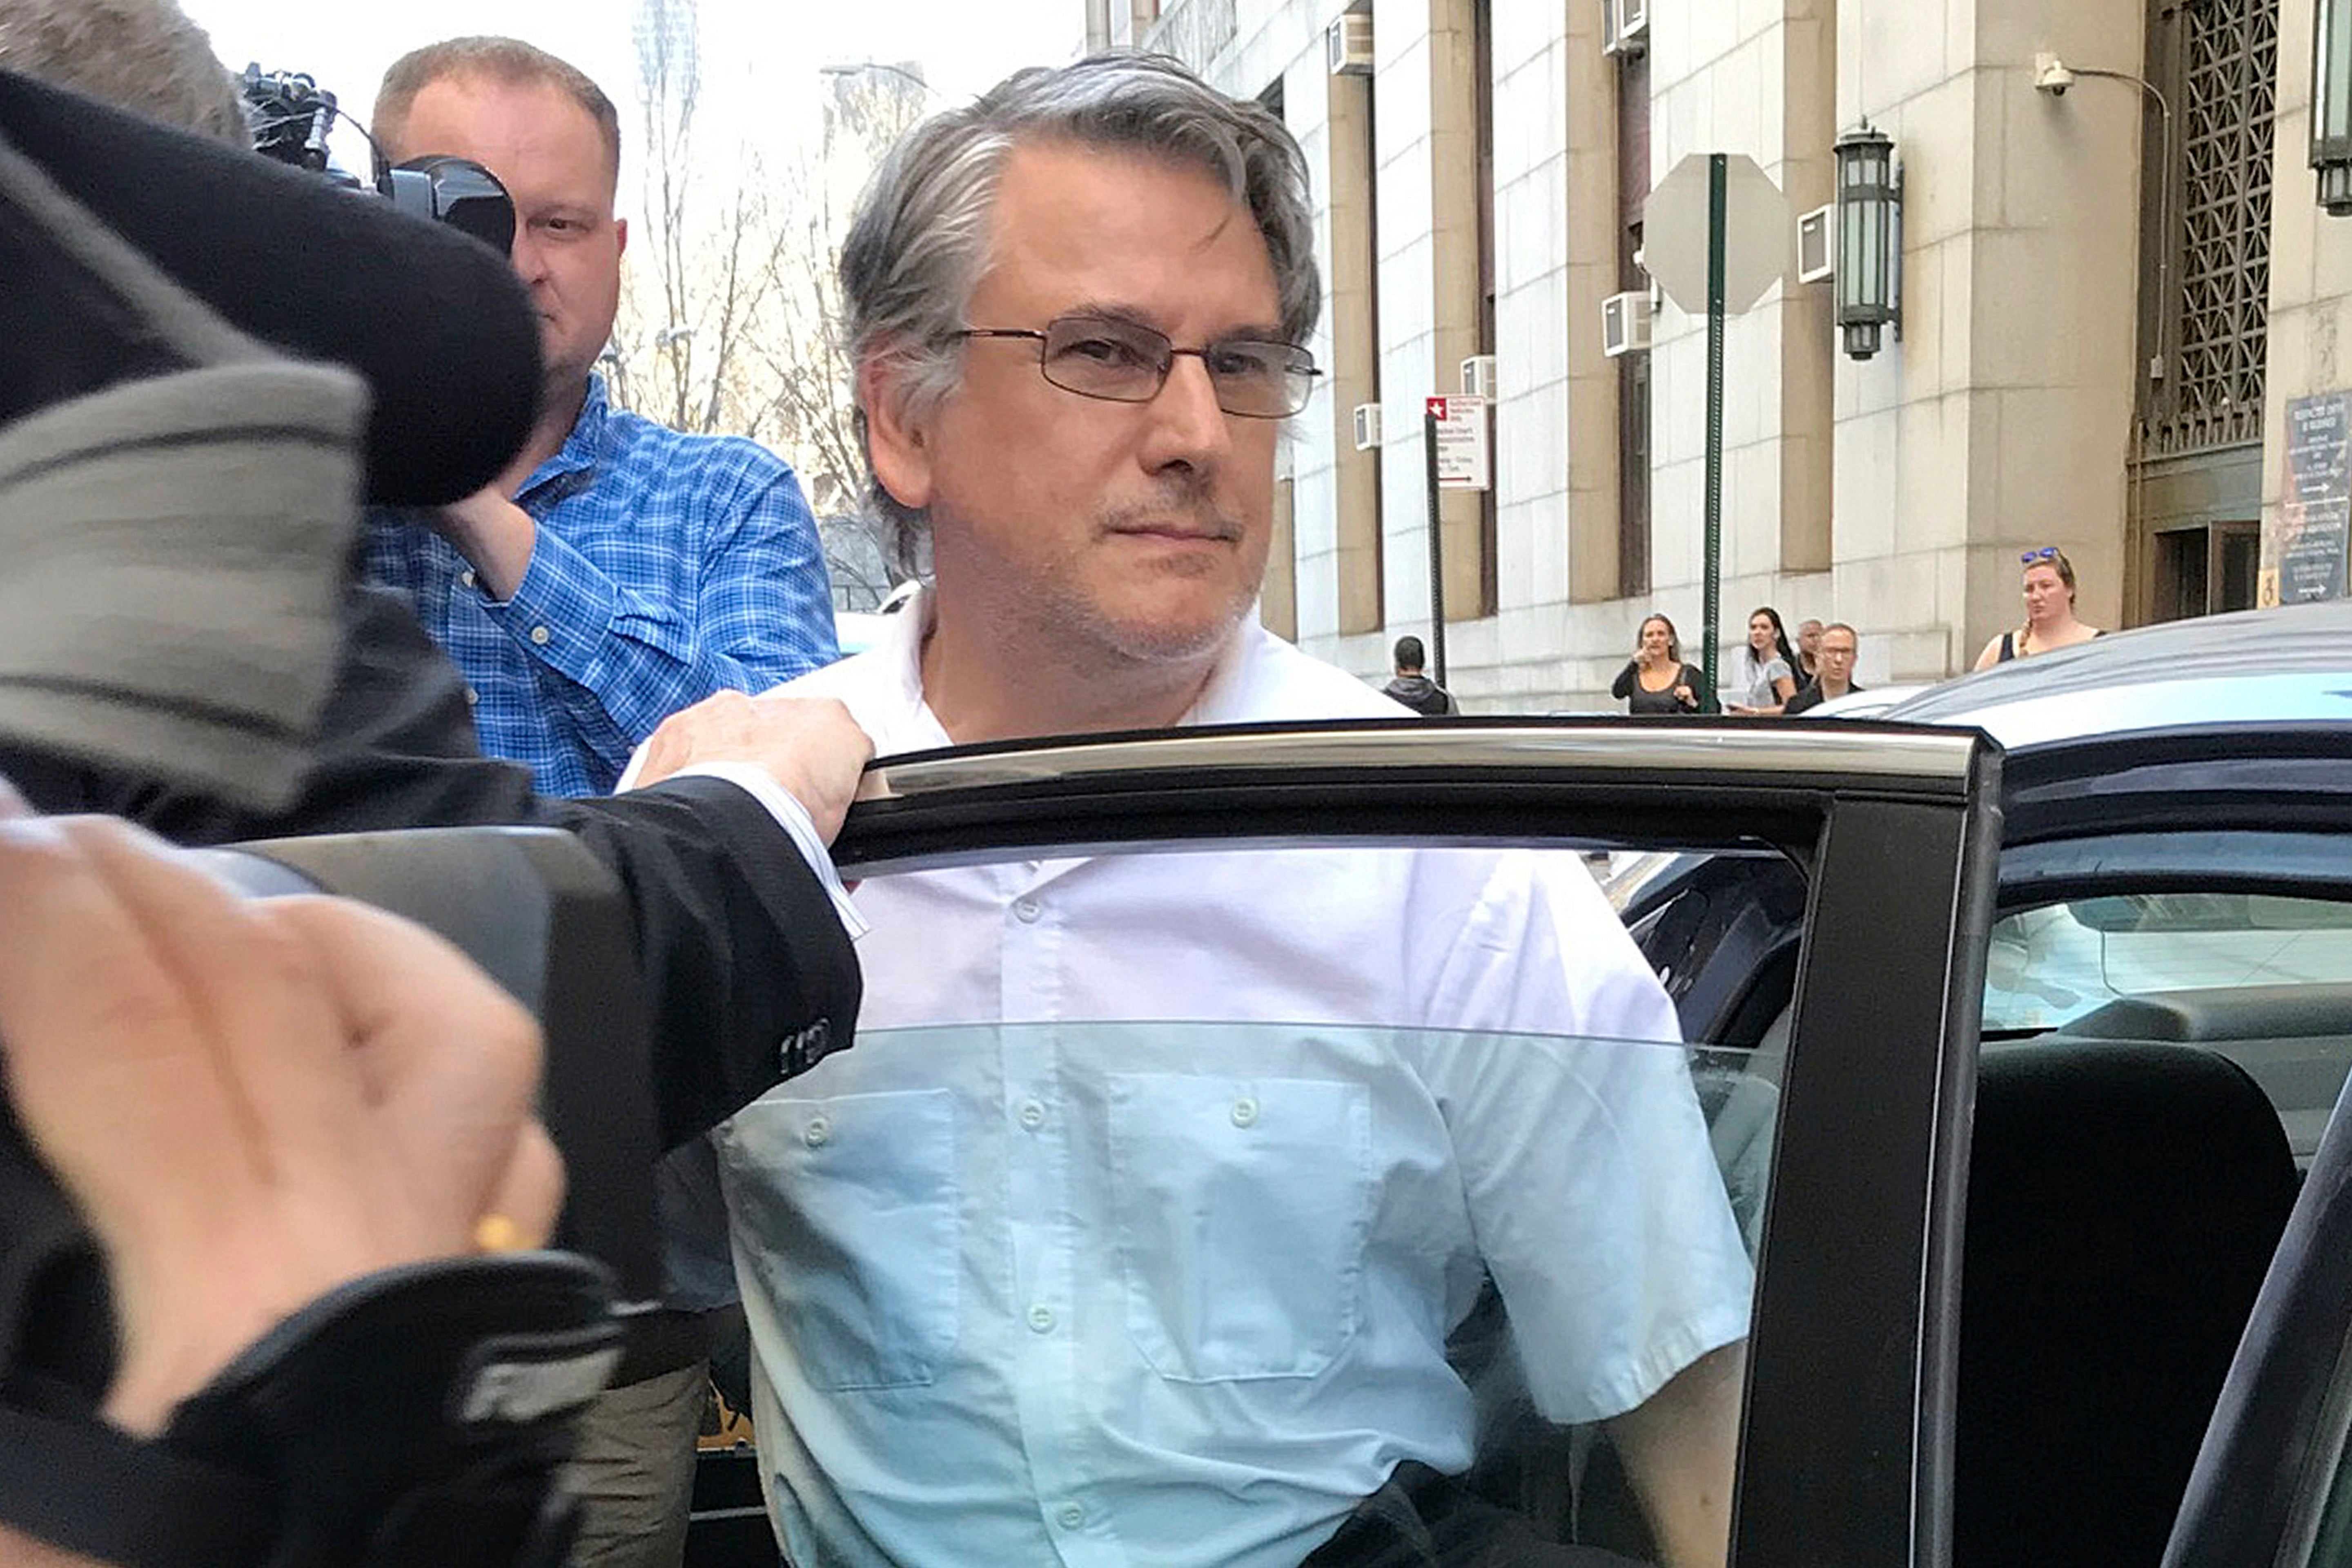 NYC Neurologist found guilty on 12 counts of sexual abuse